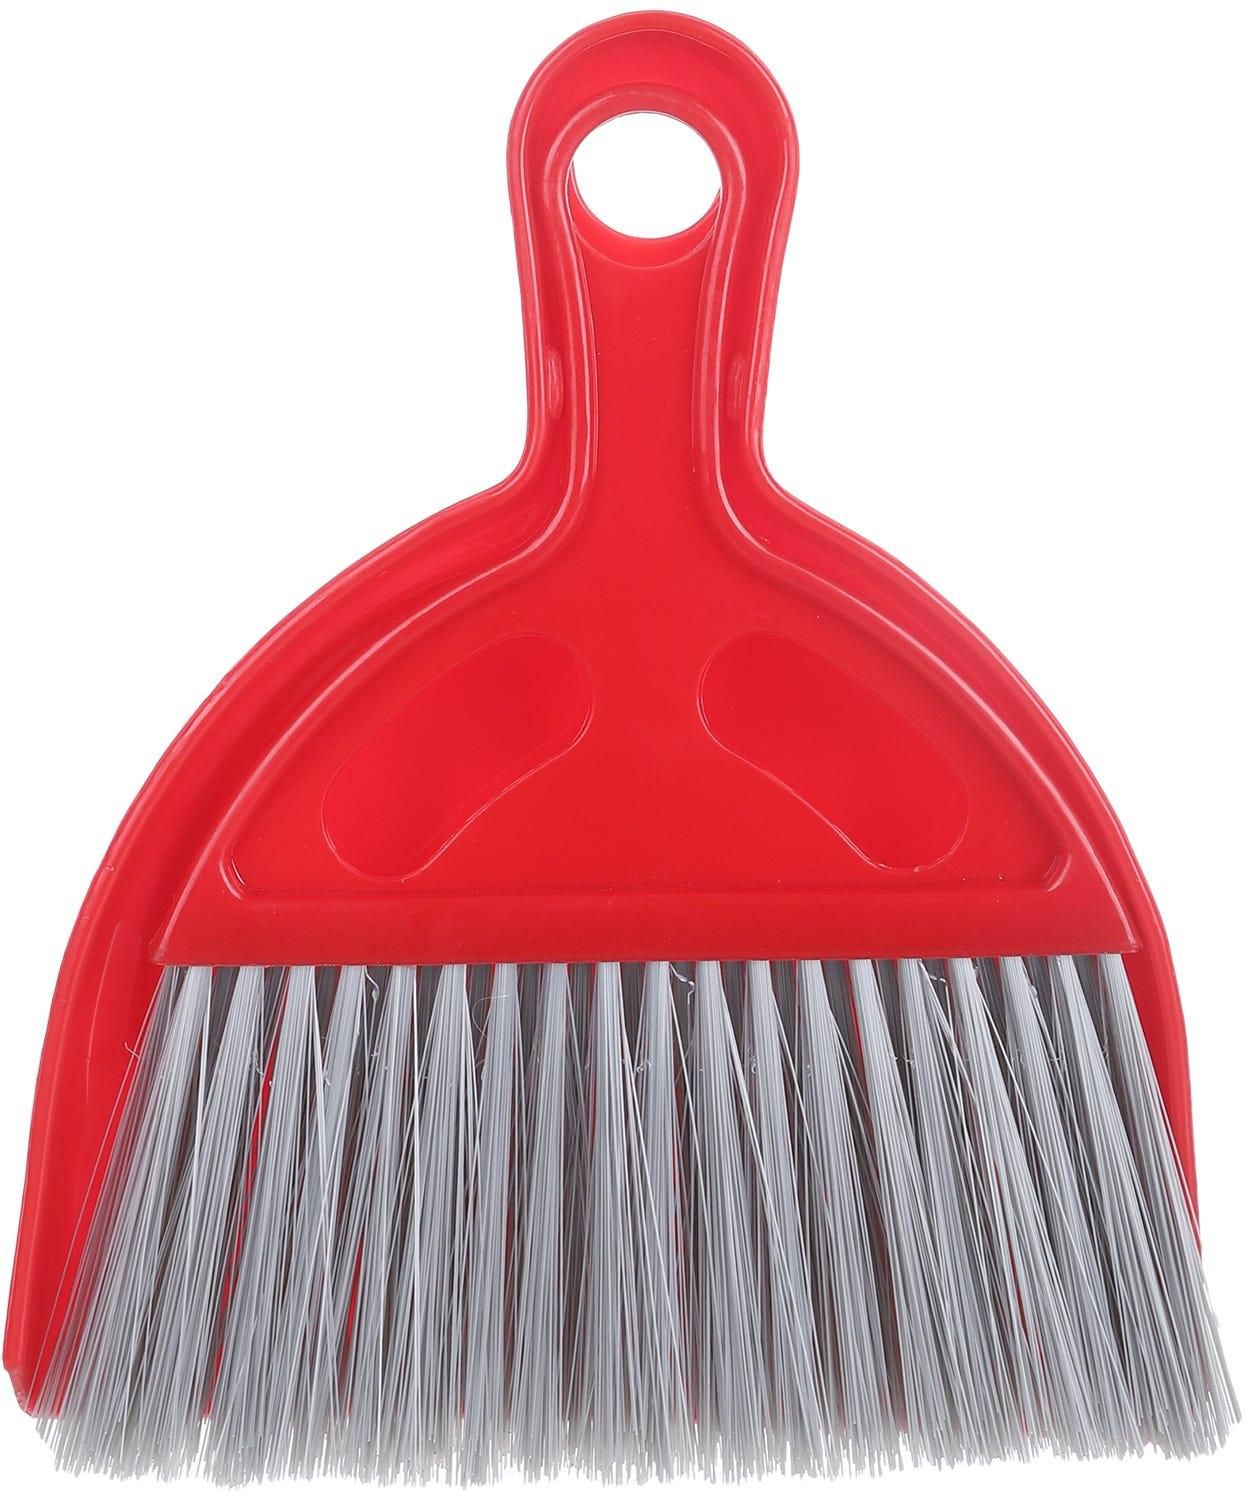 Get Liao Plastic Dustpan Brush, 13 cm - Red with best offers | Raneen.com